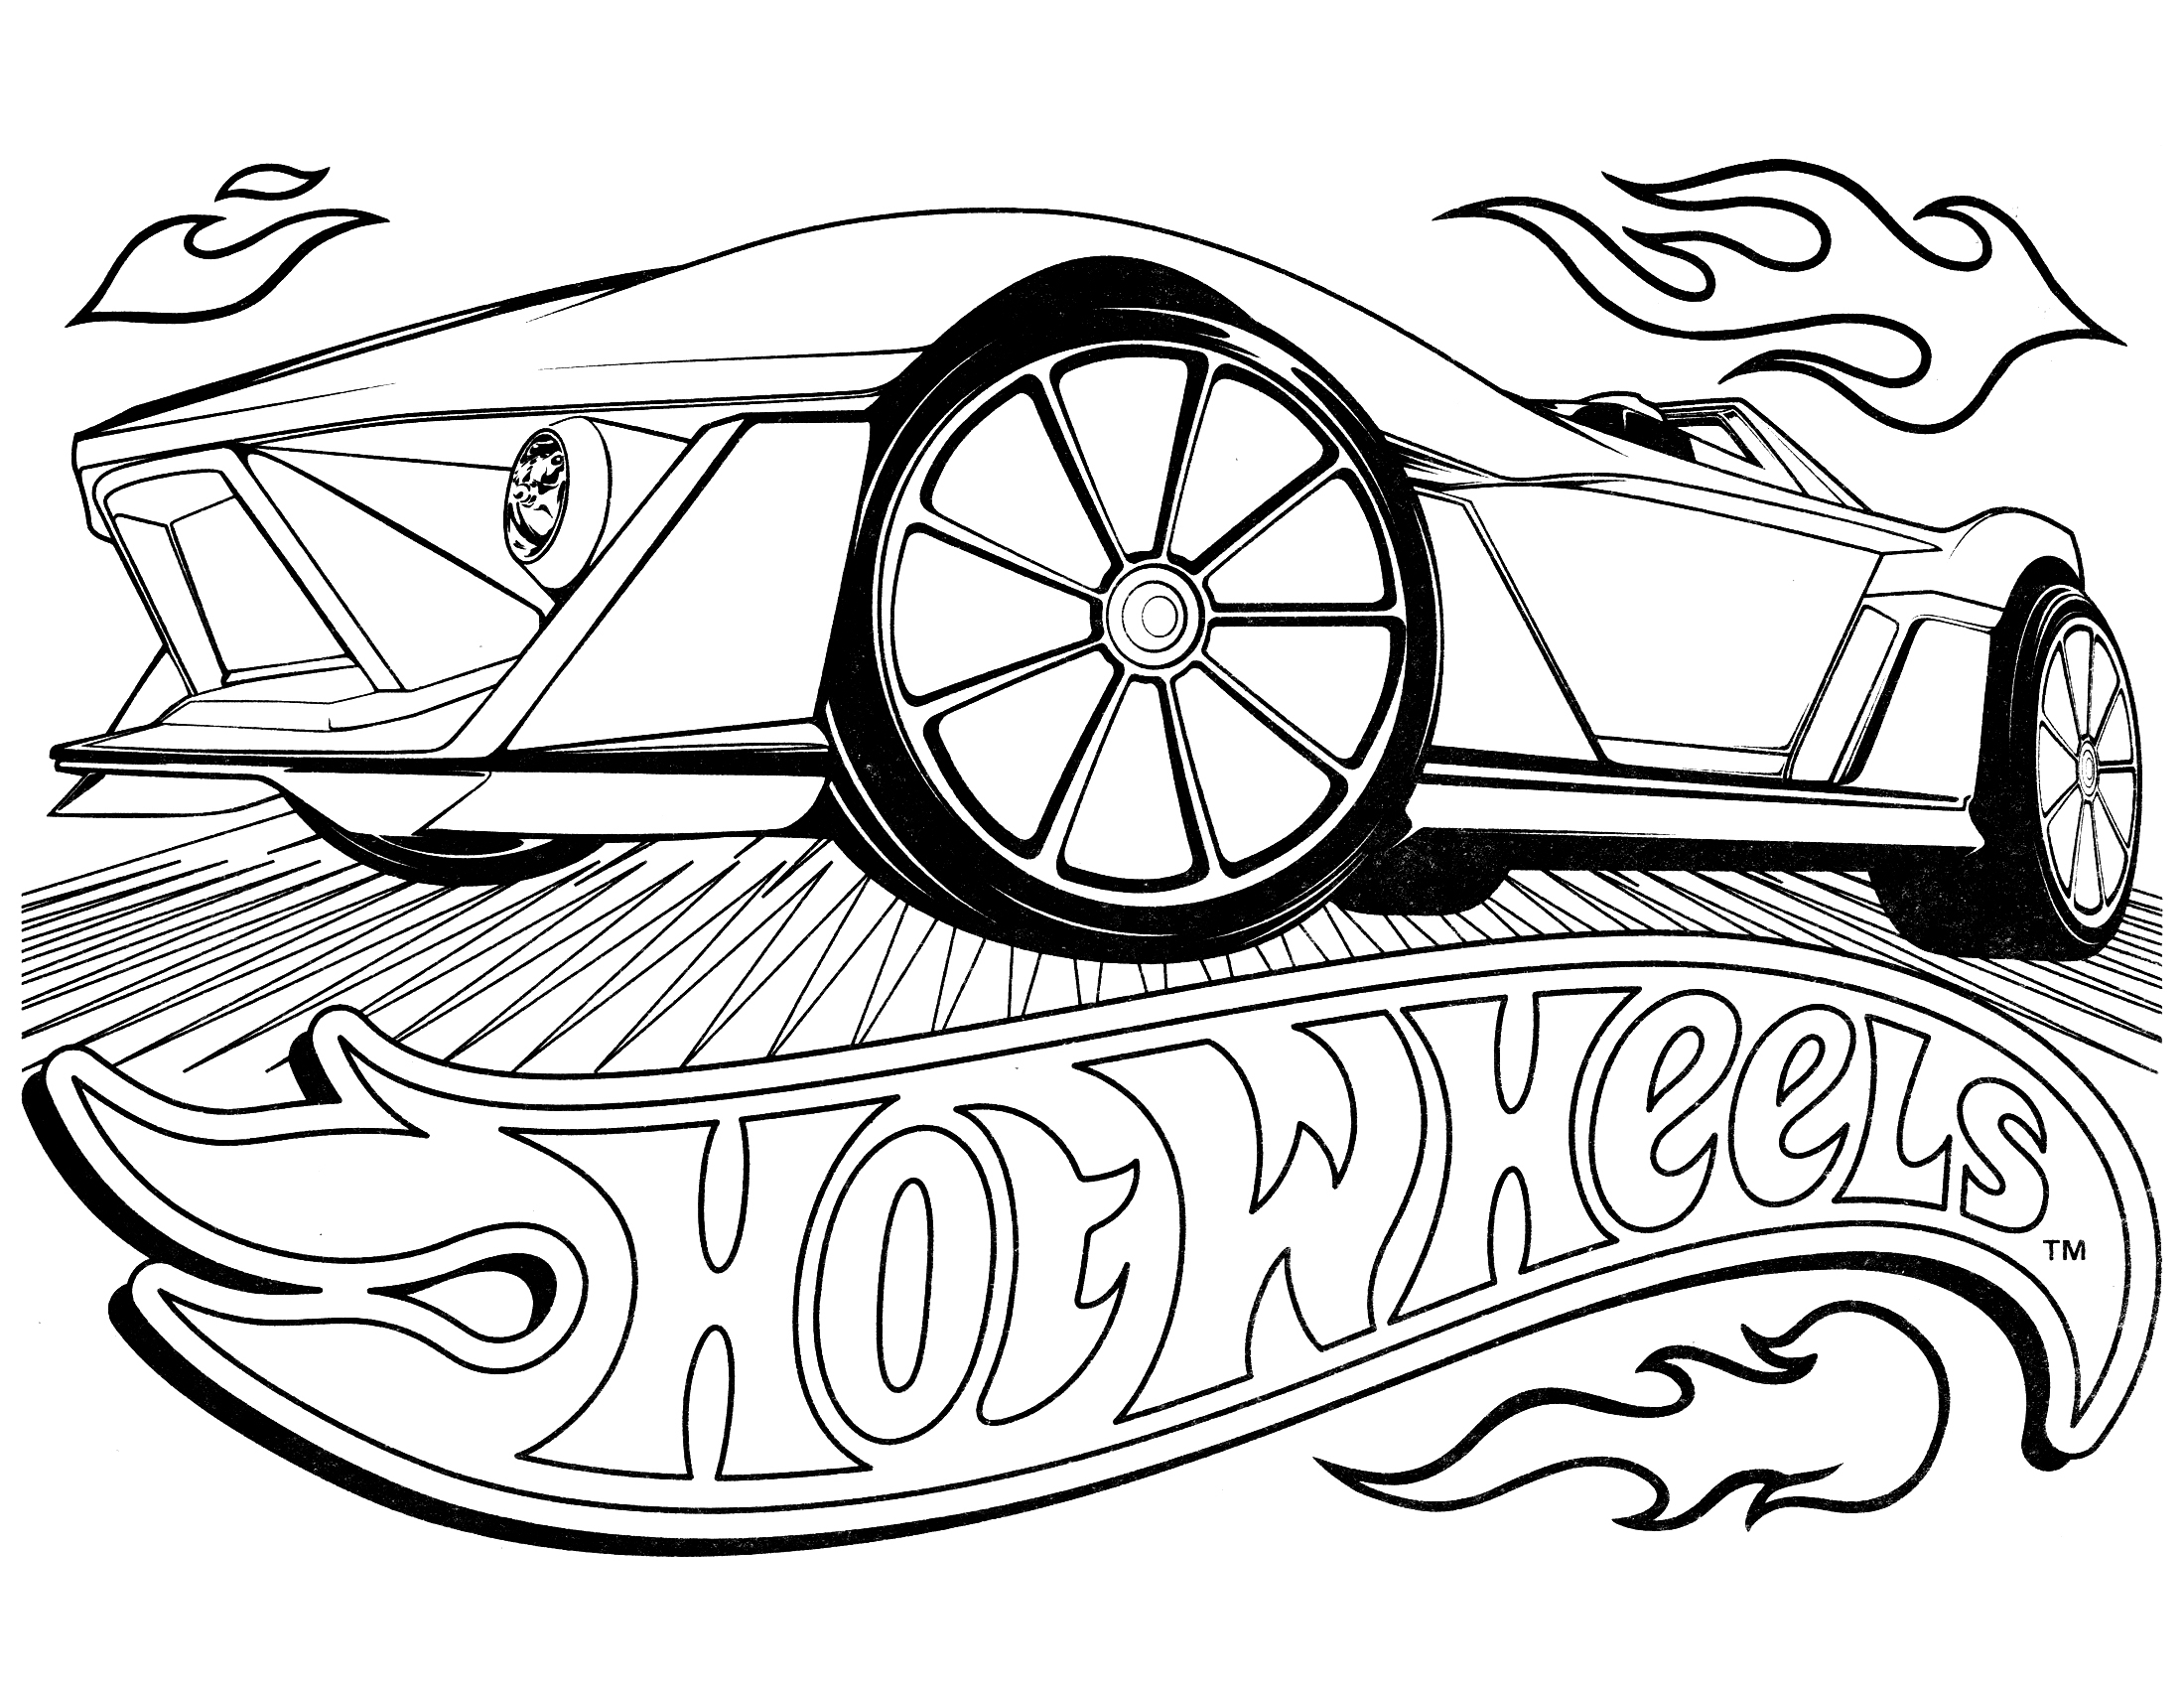 Drawing Hot wheels #145891 (Transportation) – Printable coloring pages